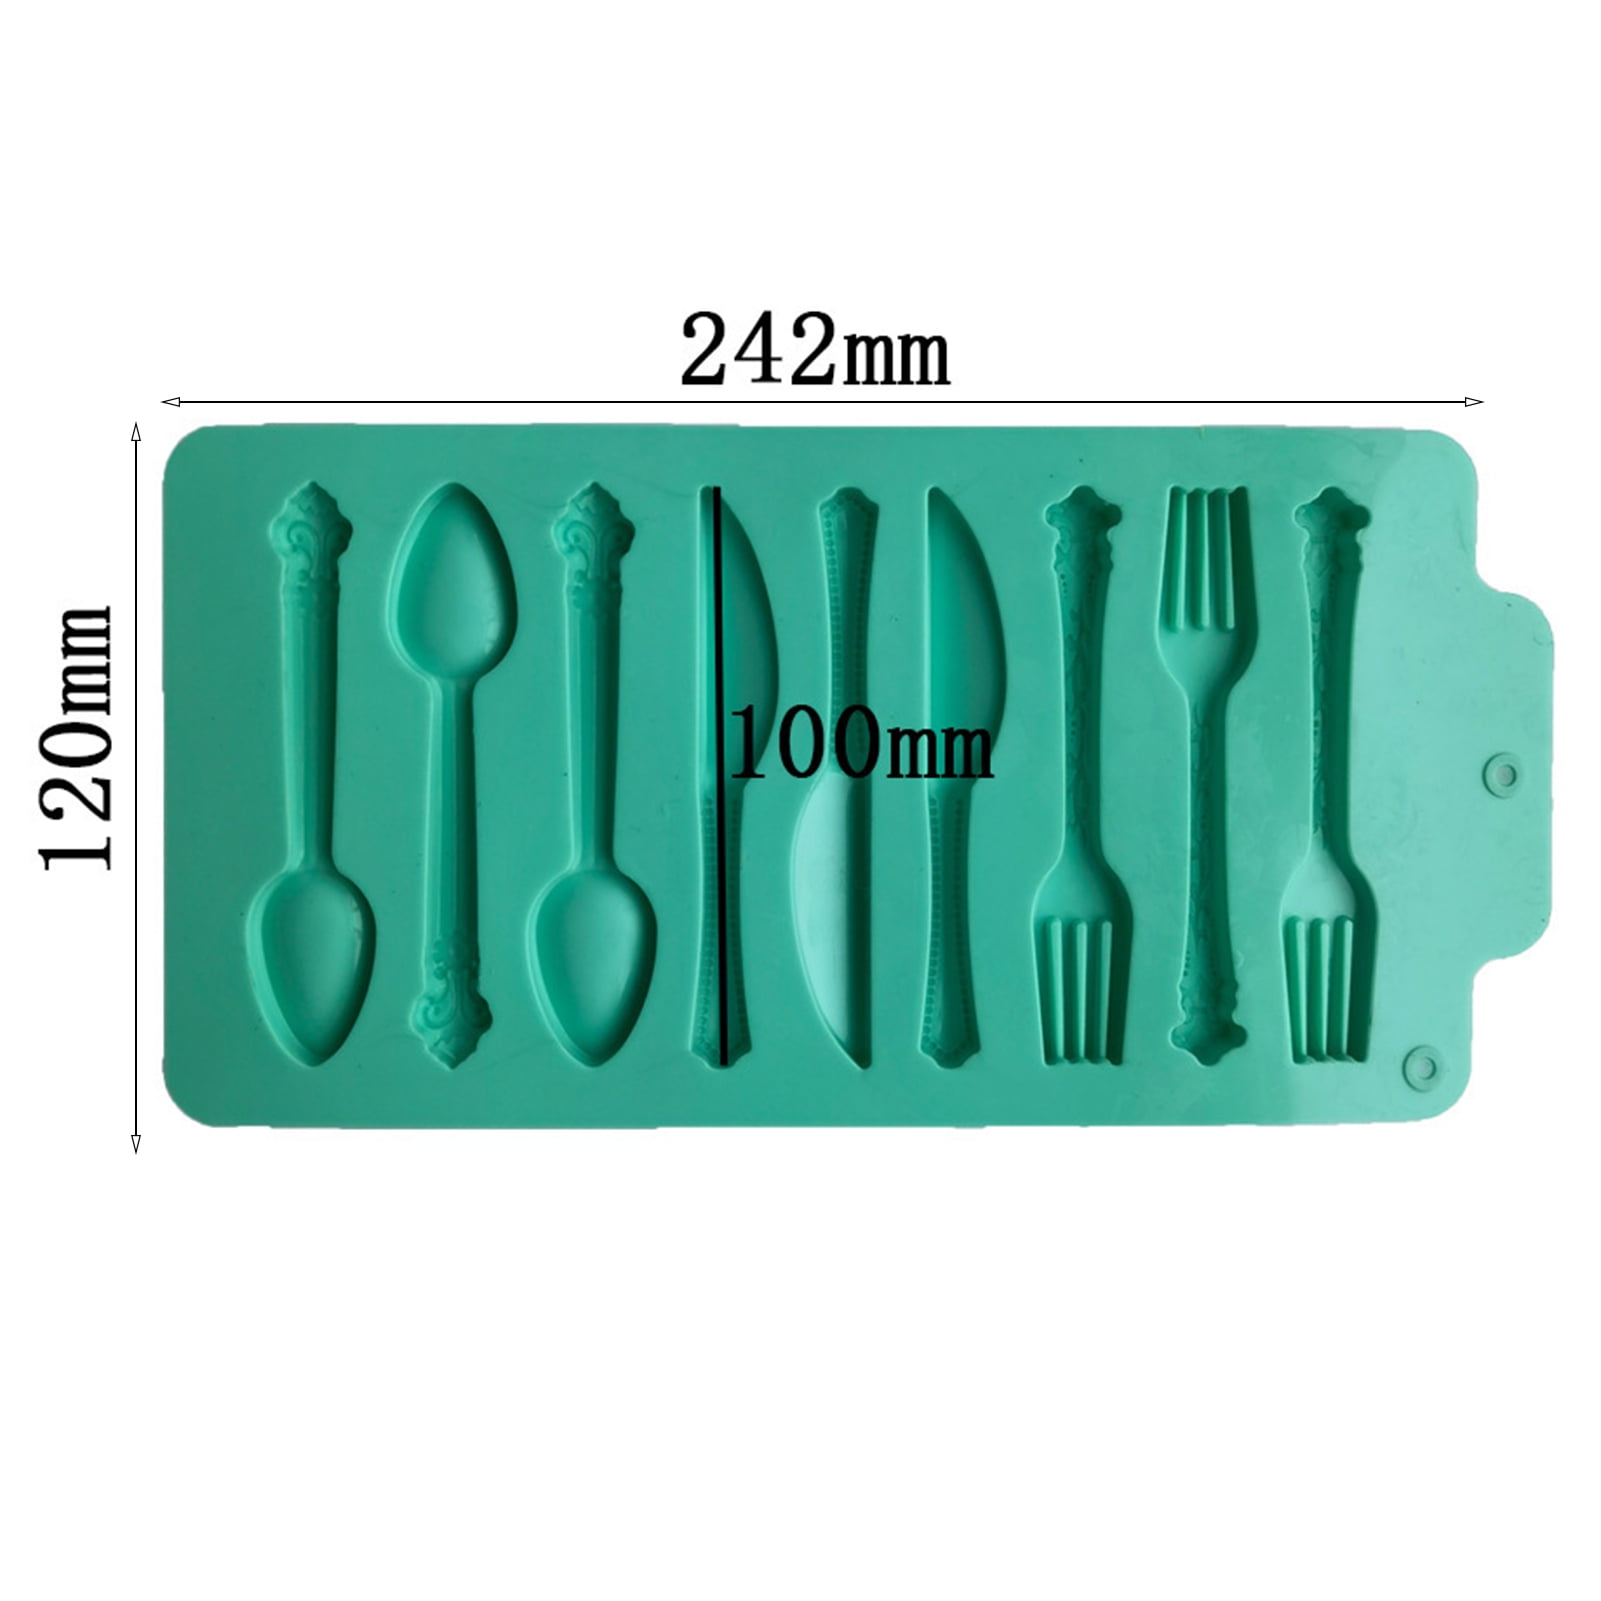 Yesbay 6-Cavity Crayon Mold Flexible Food-grade Pencil Fondant Stencil for Baking, Adult Unisex, Size: One size, Blue